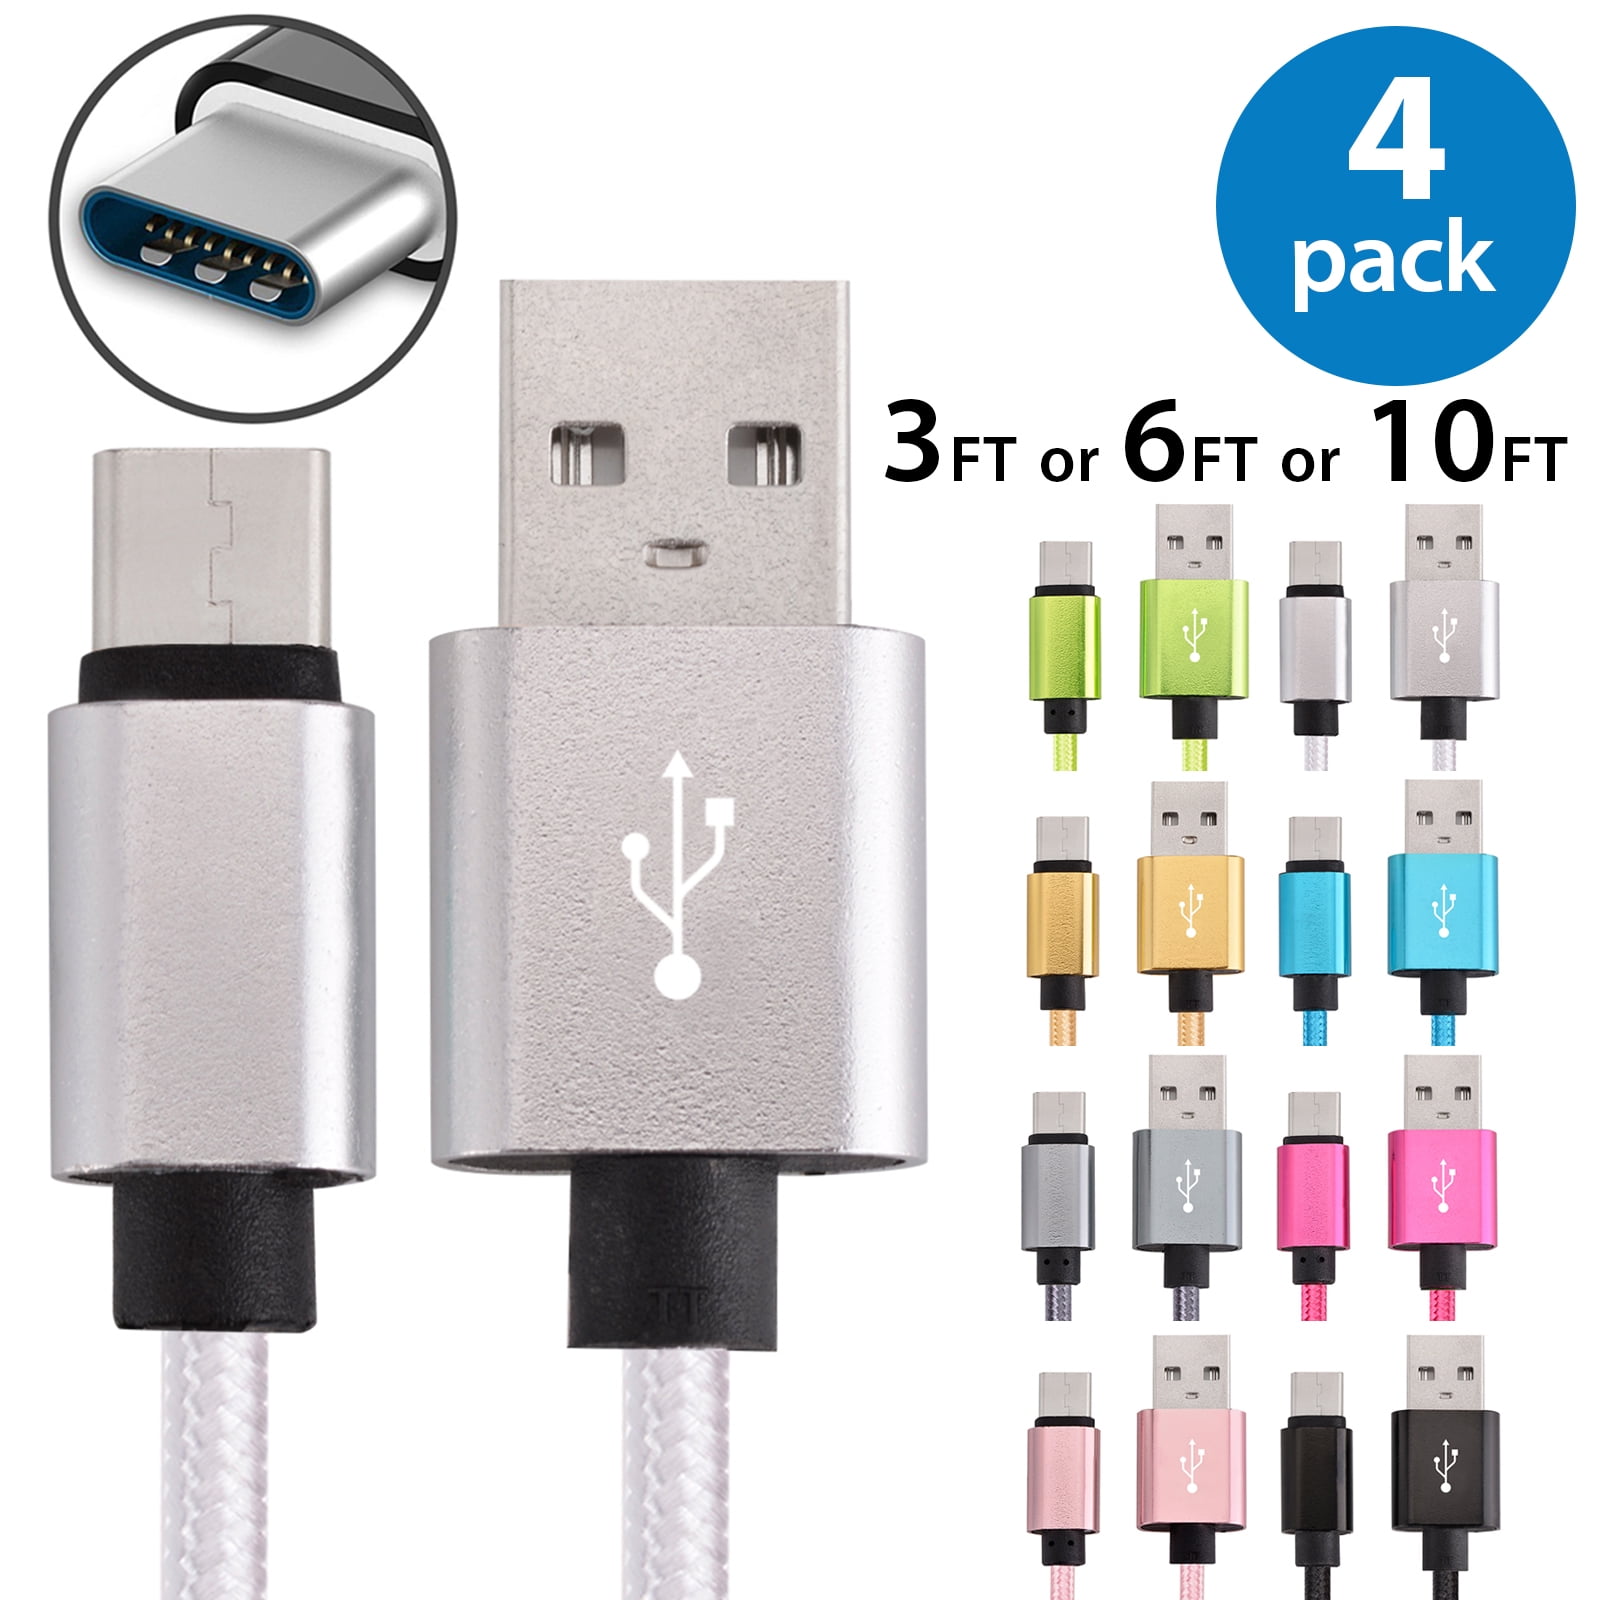 4x Afflux USB Type C Cable Fast Charging Cable 3FT USB-C Type-C 3.1 Nylon Data Sync Charger Cord For Samsung Galaxy S8 + Note 8 Nexus 5X 6P LG G5 G6 V20 HTC 10 Google Pixel XL OnePlus 3 5 Gold